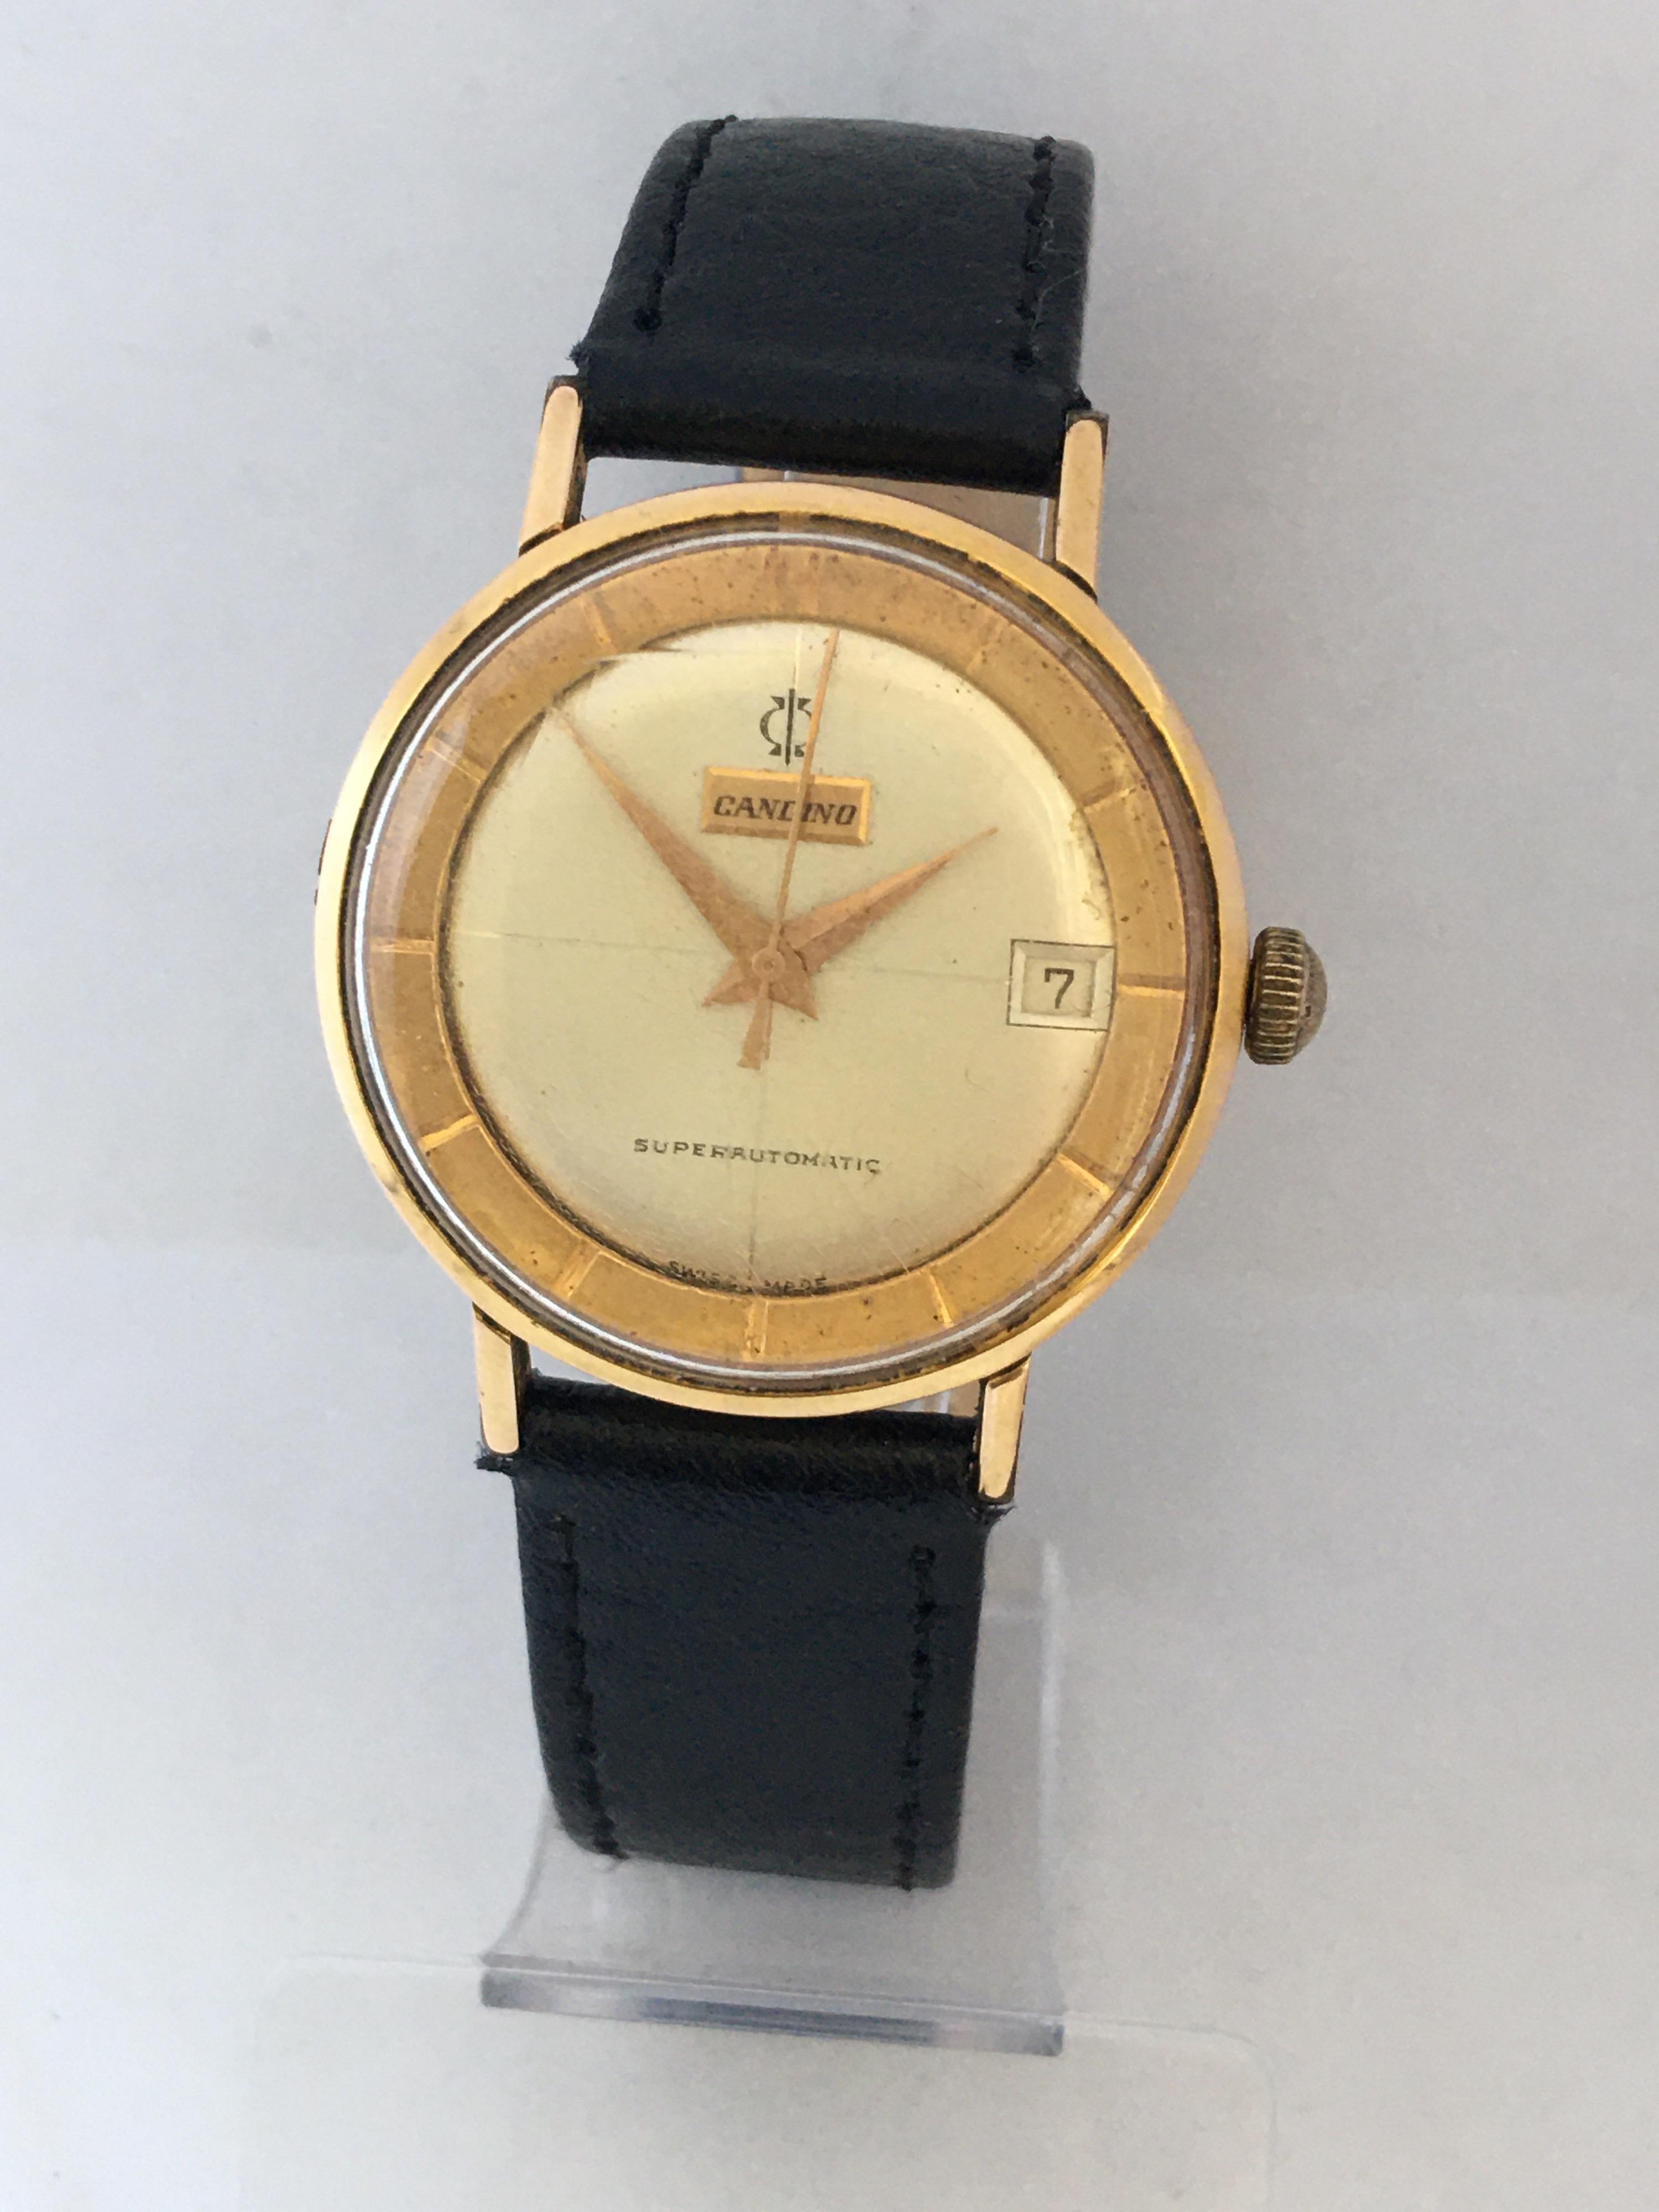 This beautiful pre-owned watch is working and it is running well. Visible signs of ageing and wear with scratches on the glass and the watch case as shown. Please study the images carefully as form part of the description.